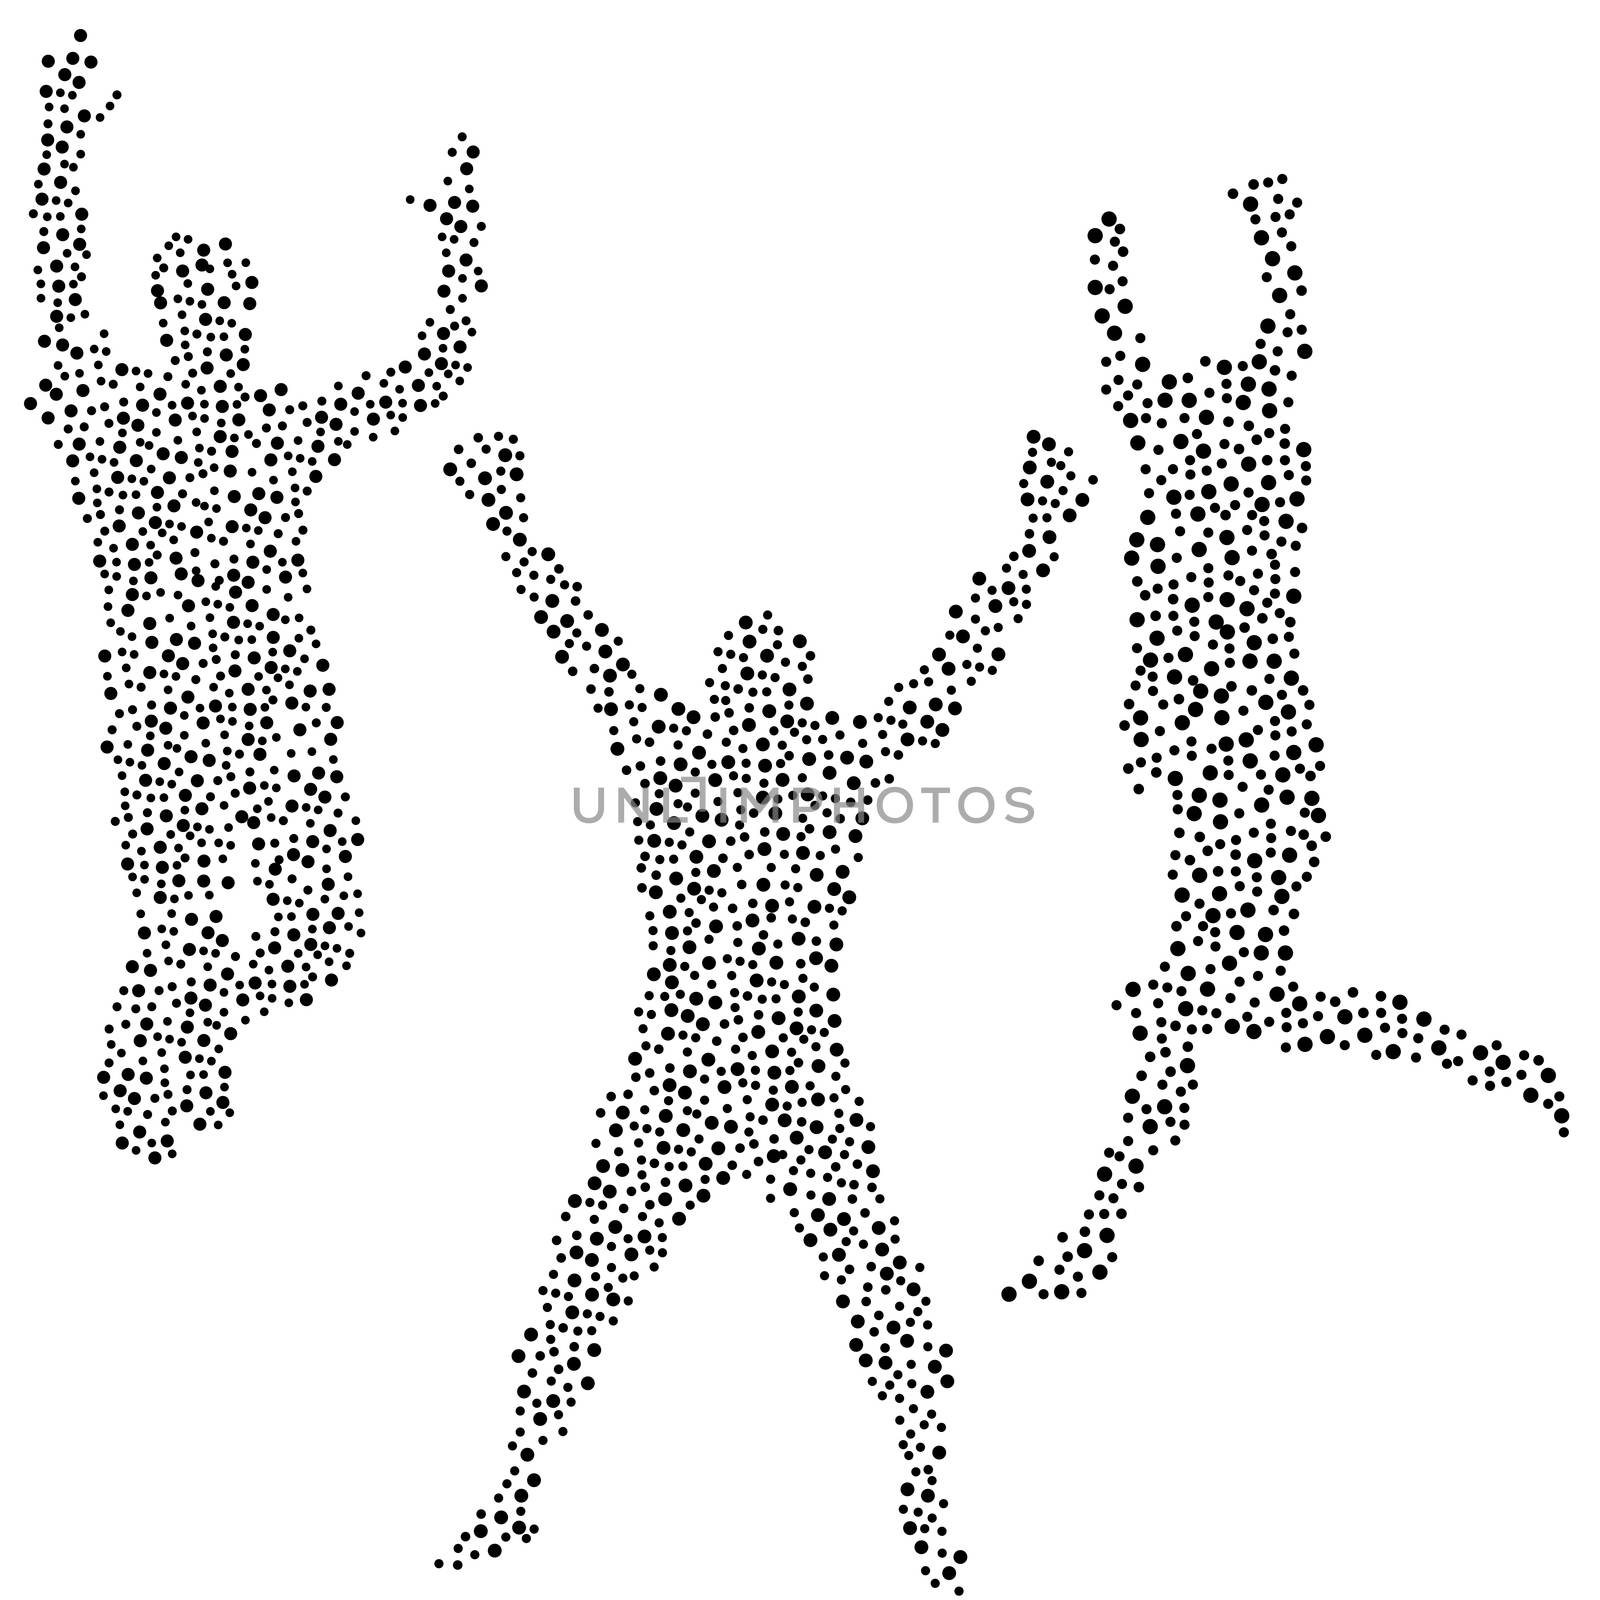 Dots silhouettes of three men jumping